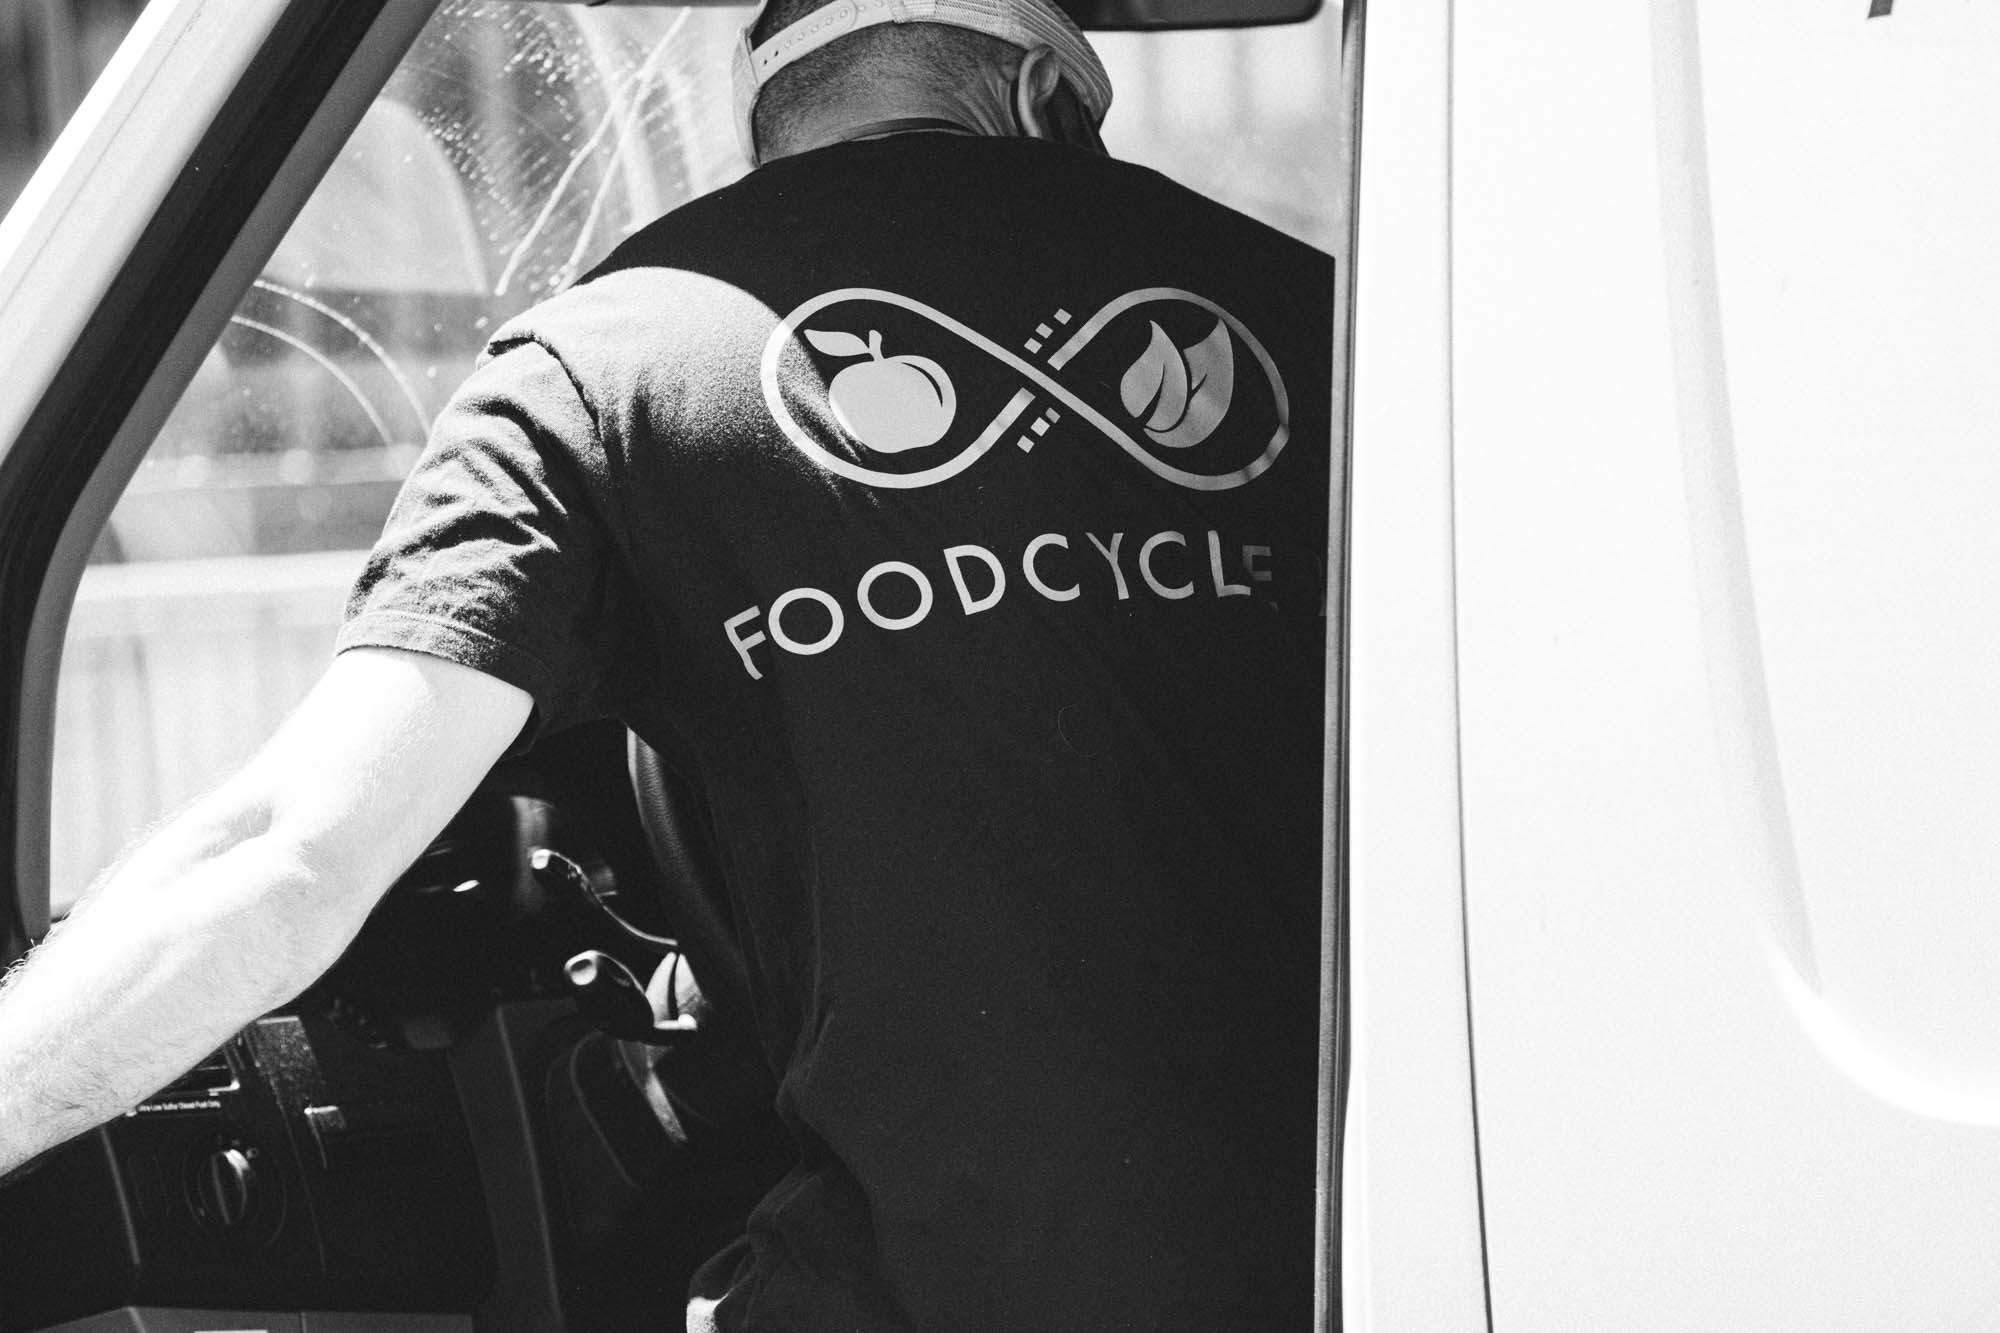 Food Cycle - New Technology - Black and White Driver